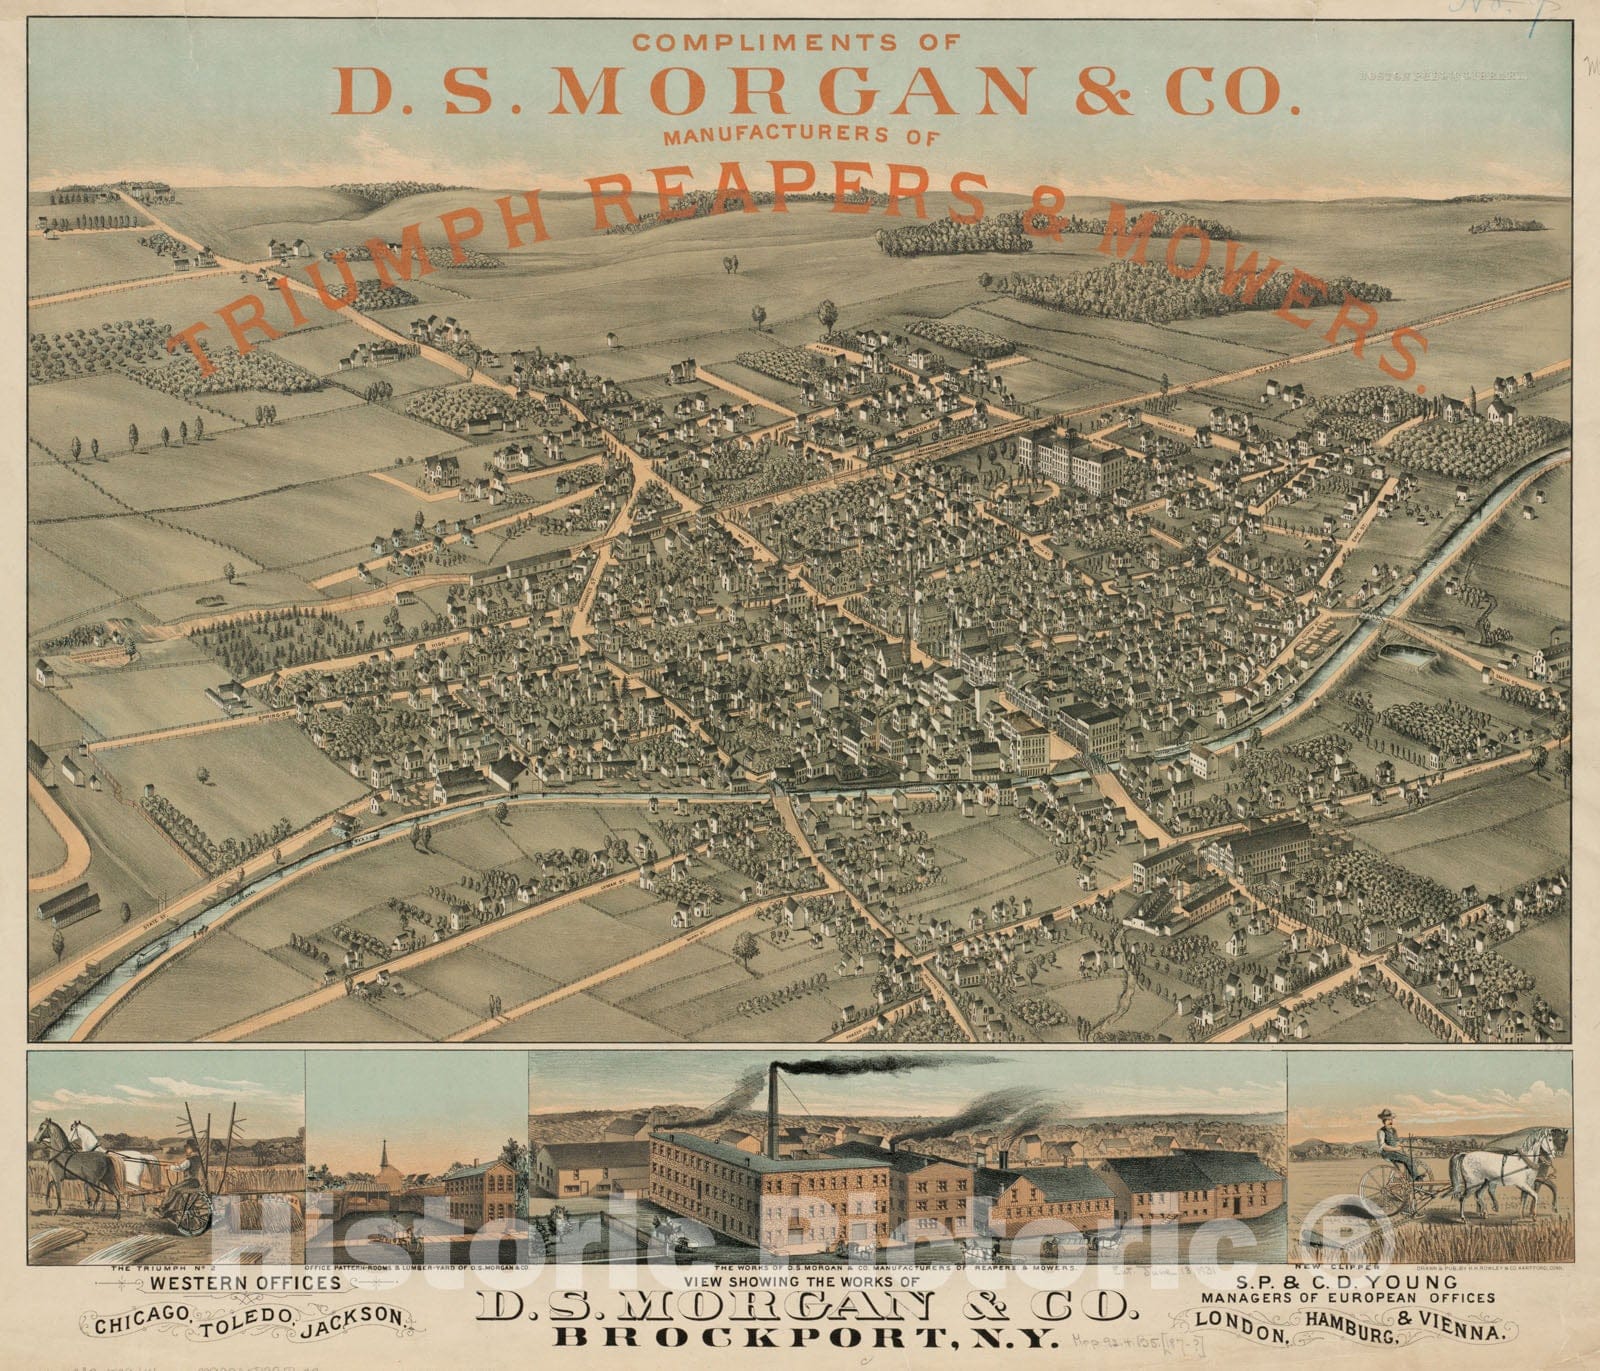 Historical Map, 1879-1881 View Showing The Works of D.S. Morgan & Co, Brockport, N.Y, Vintage Wall Art